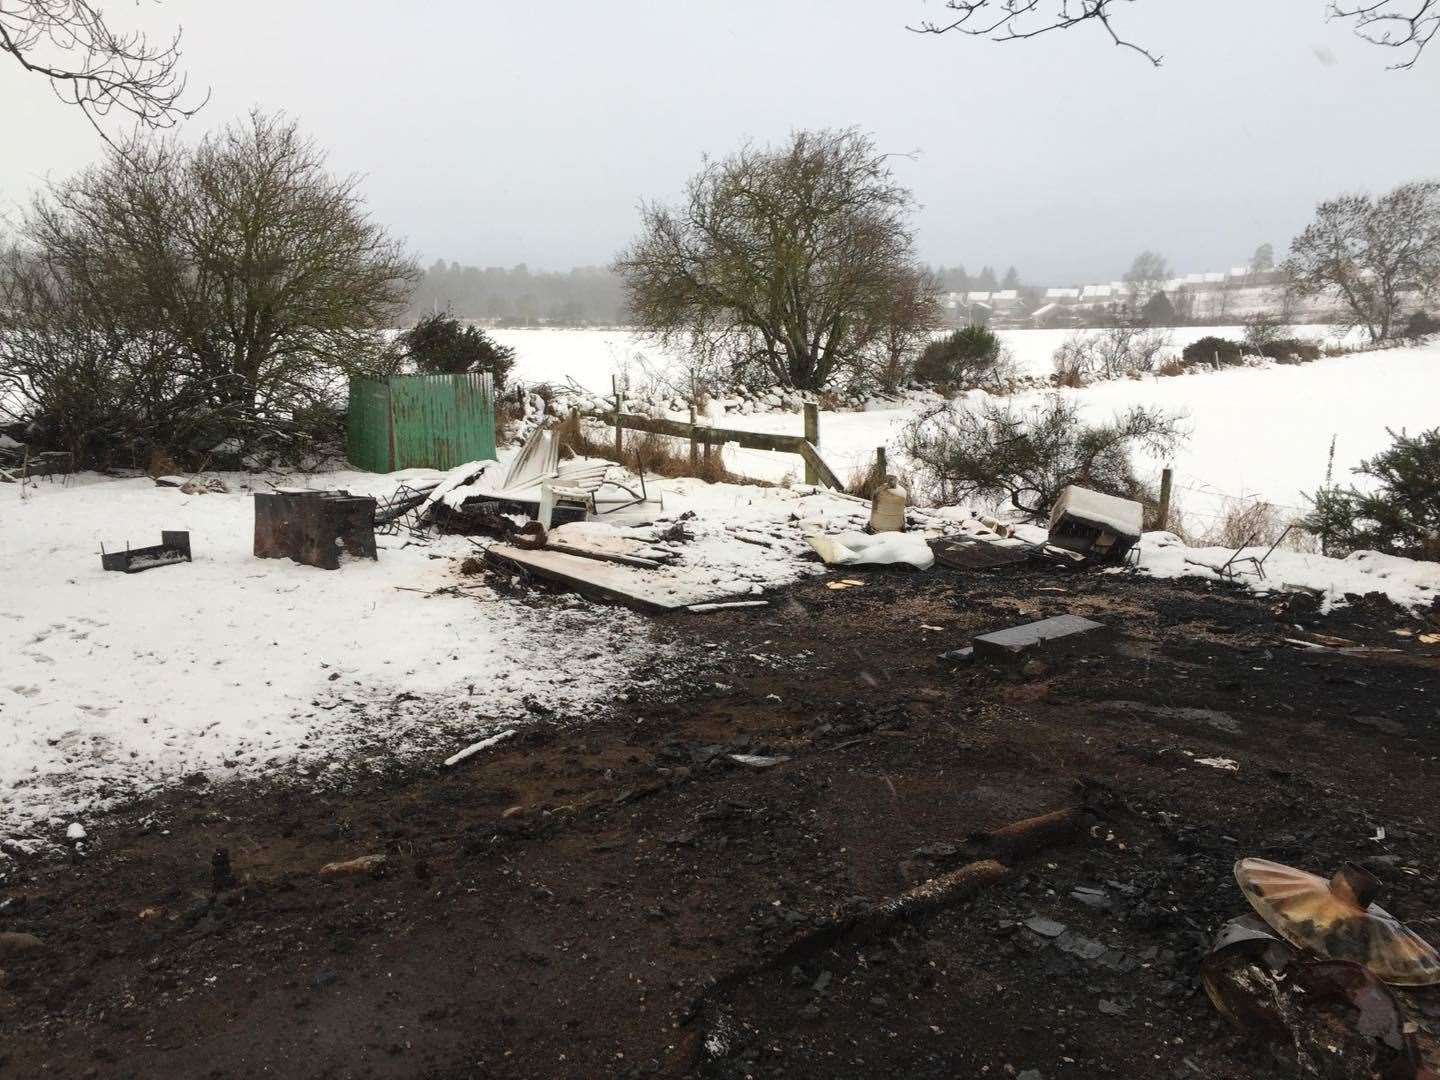 The deliberate fire at Kemnay Shooting Club was cited by the MSP.